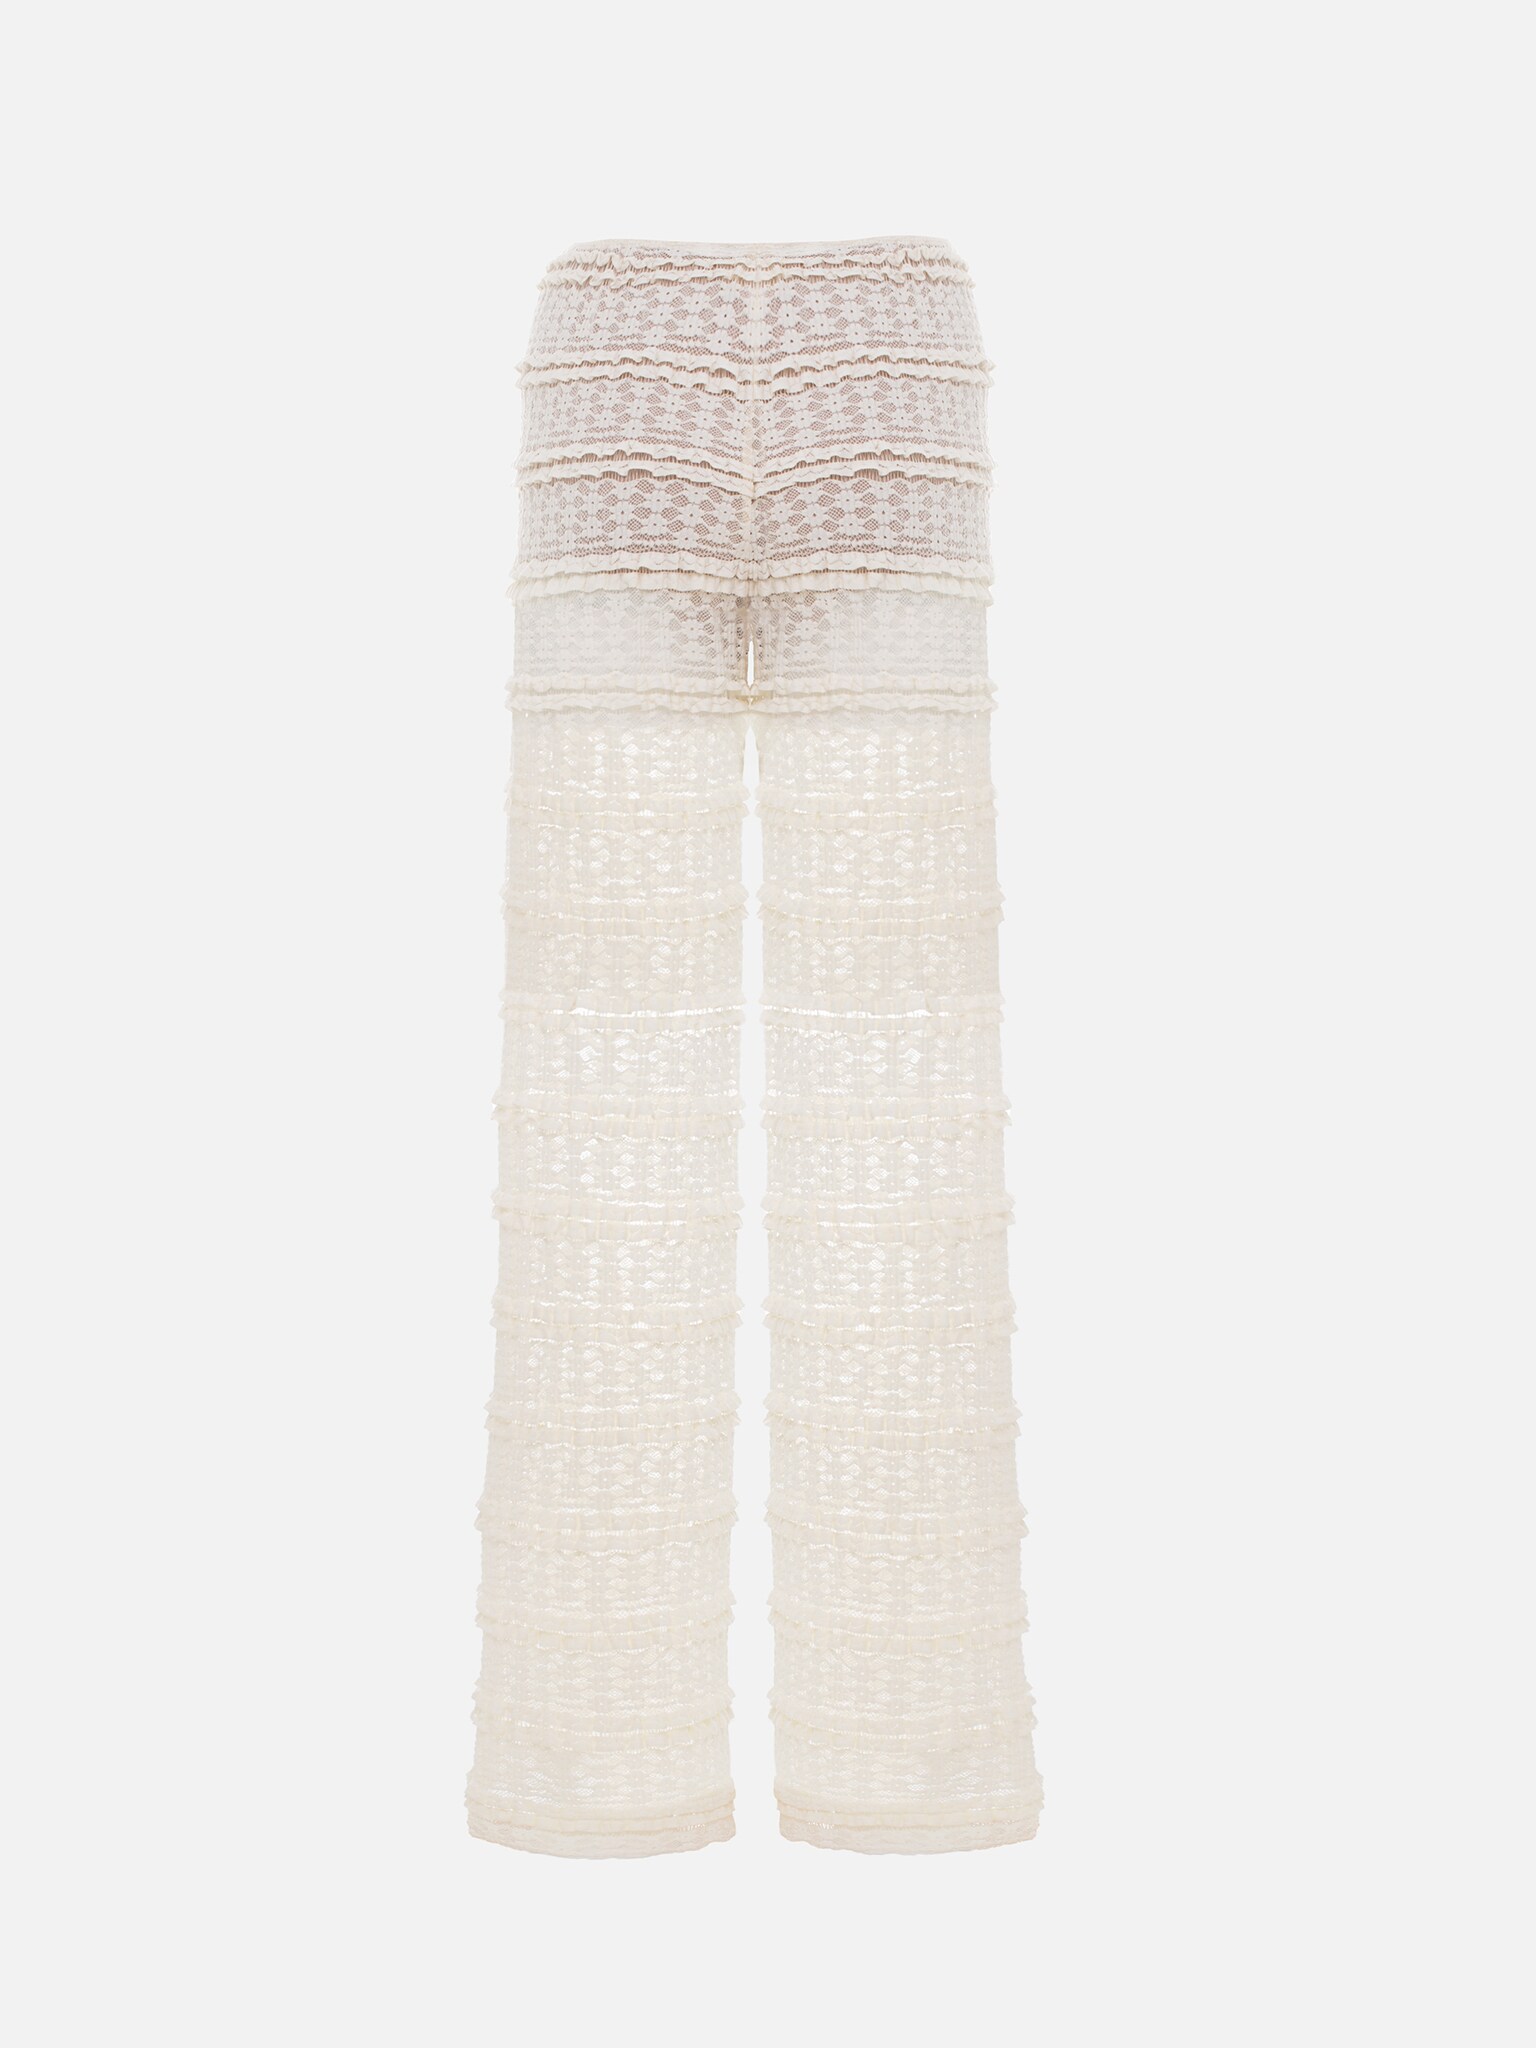 Openwork knitted trousers